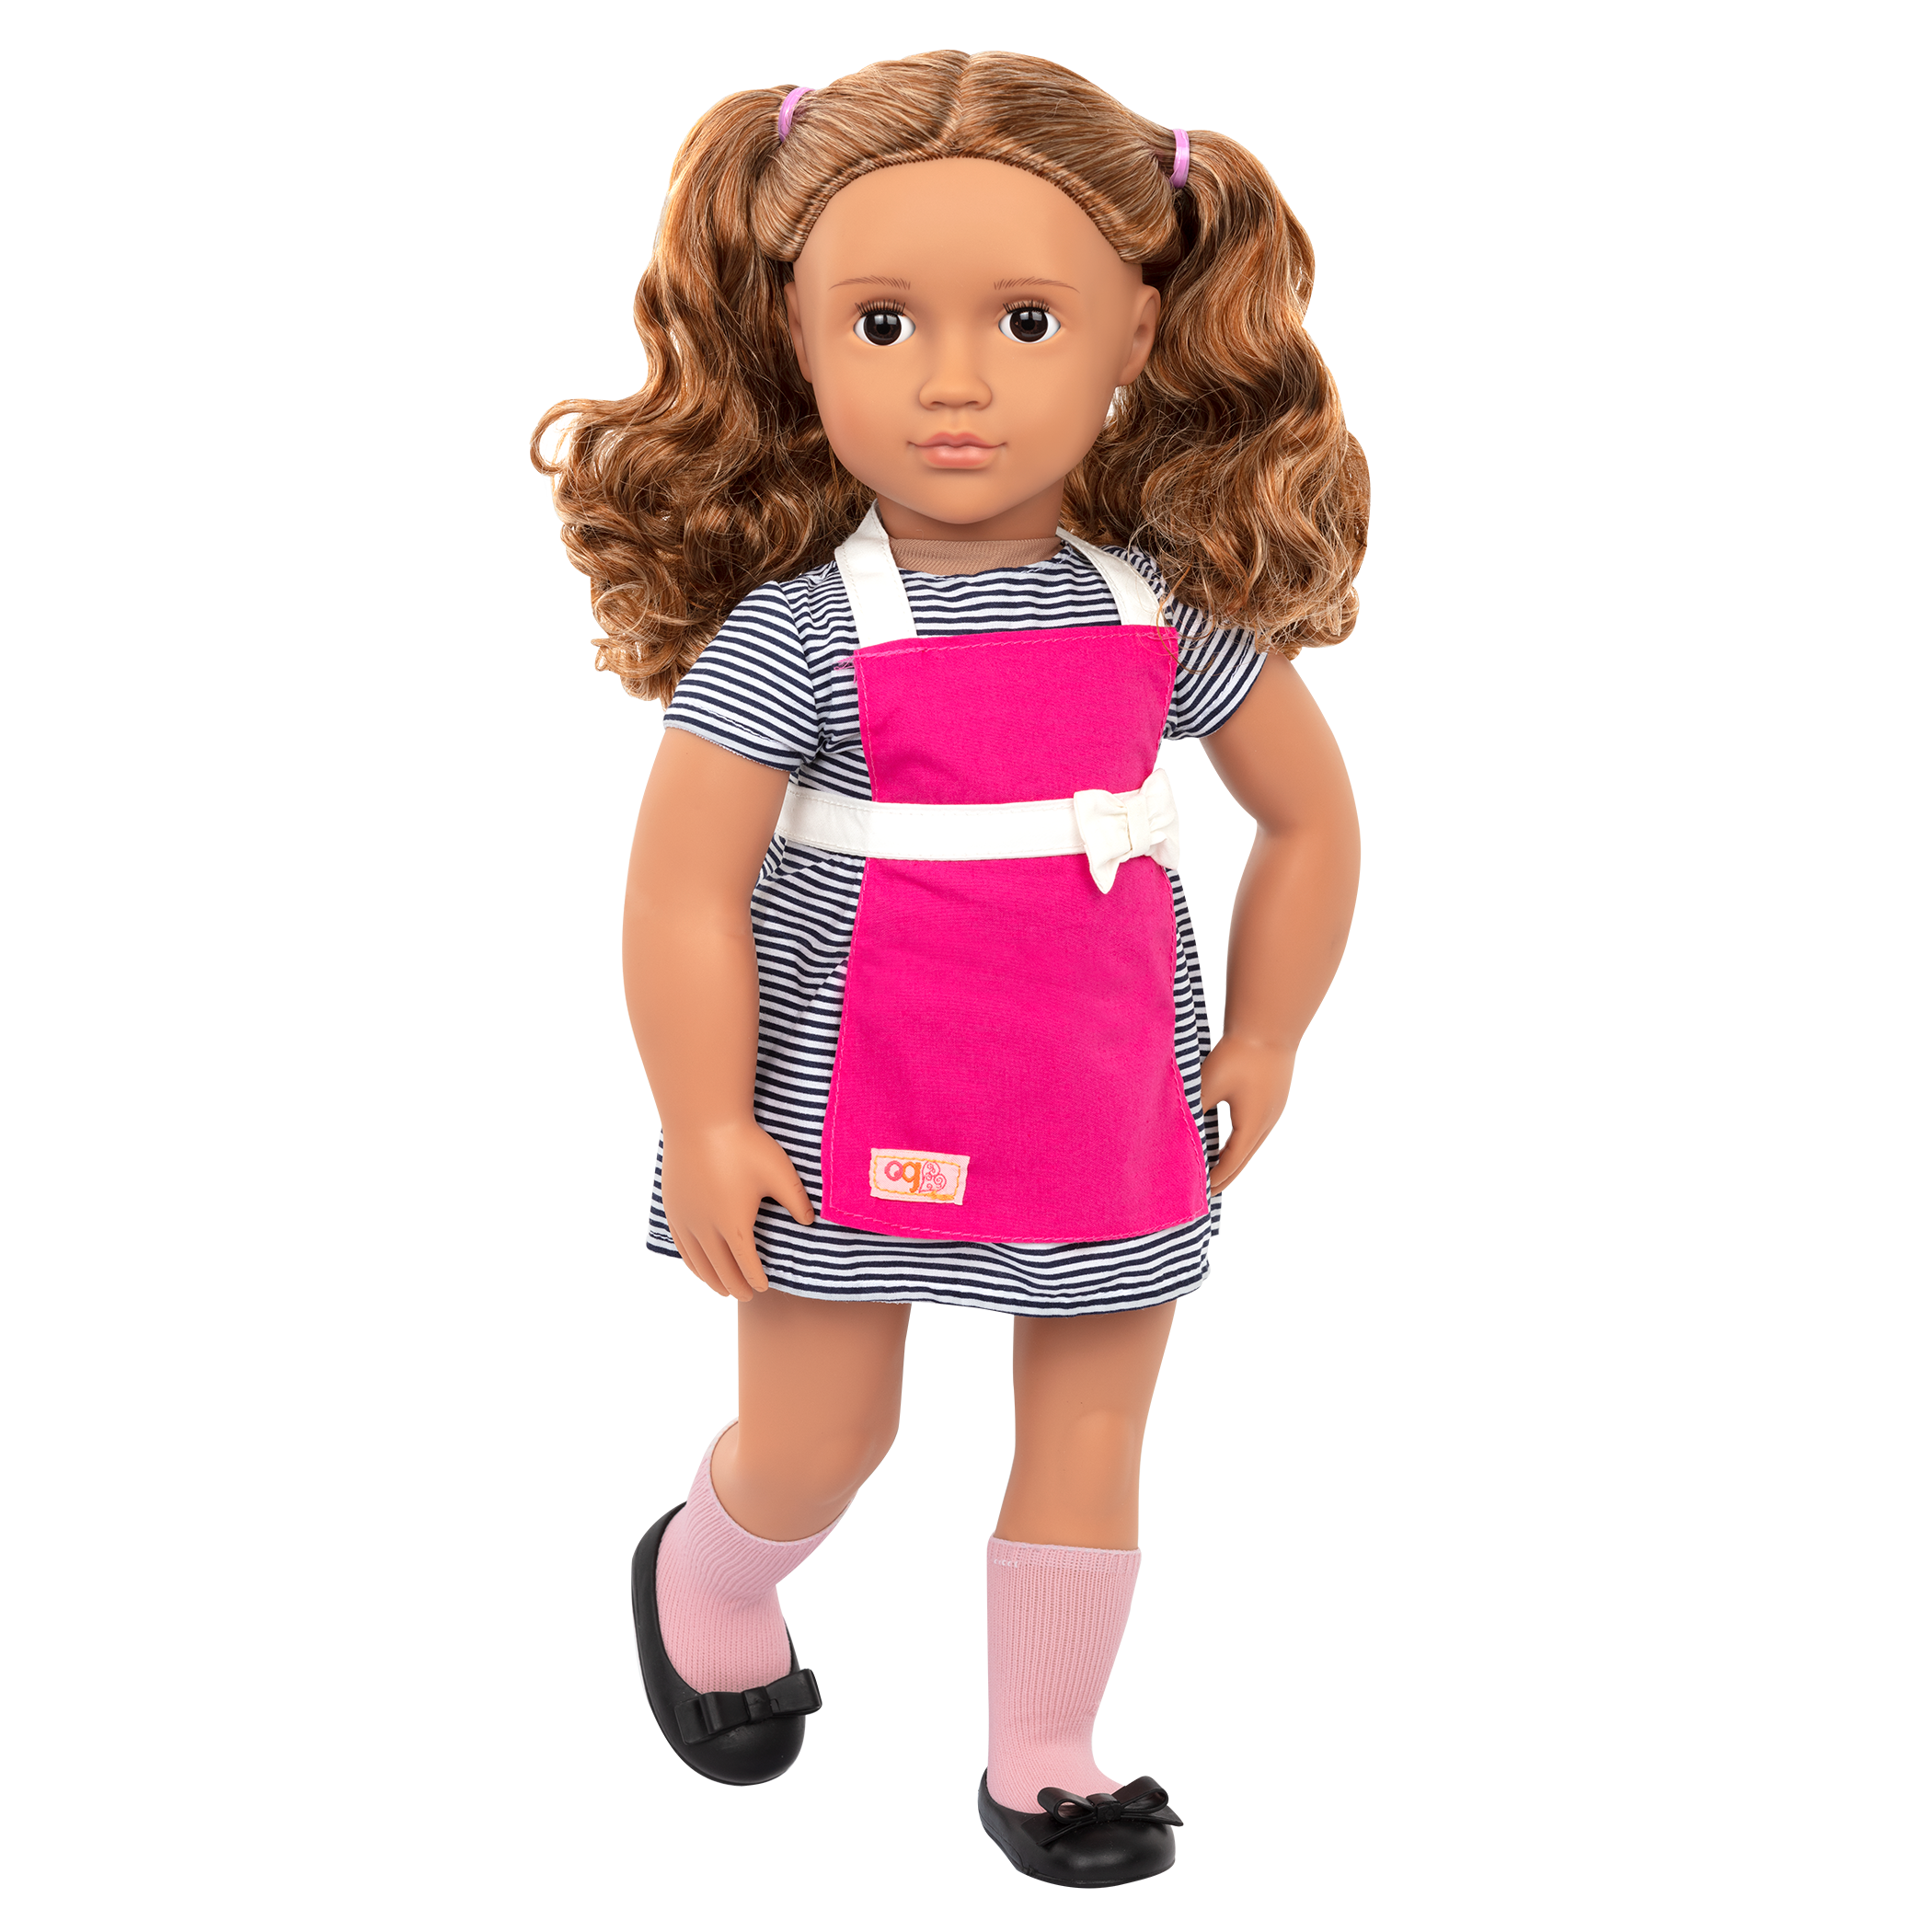 18-inch doll with light-brown hair, brown eyes, diner accessories and storybook